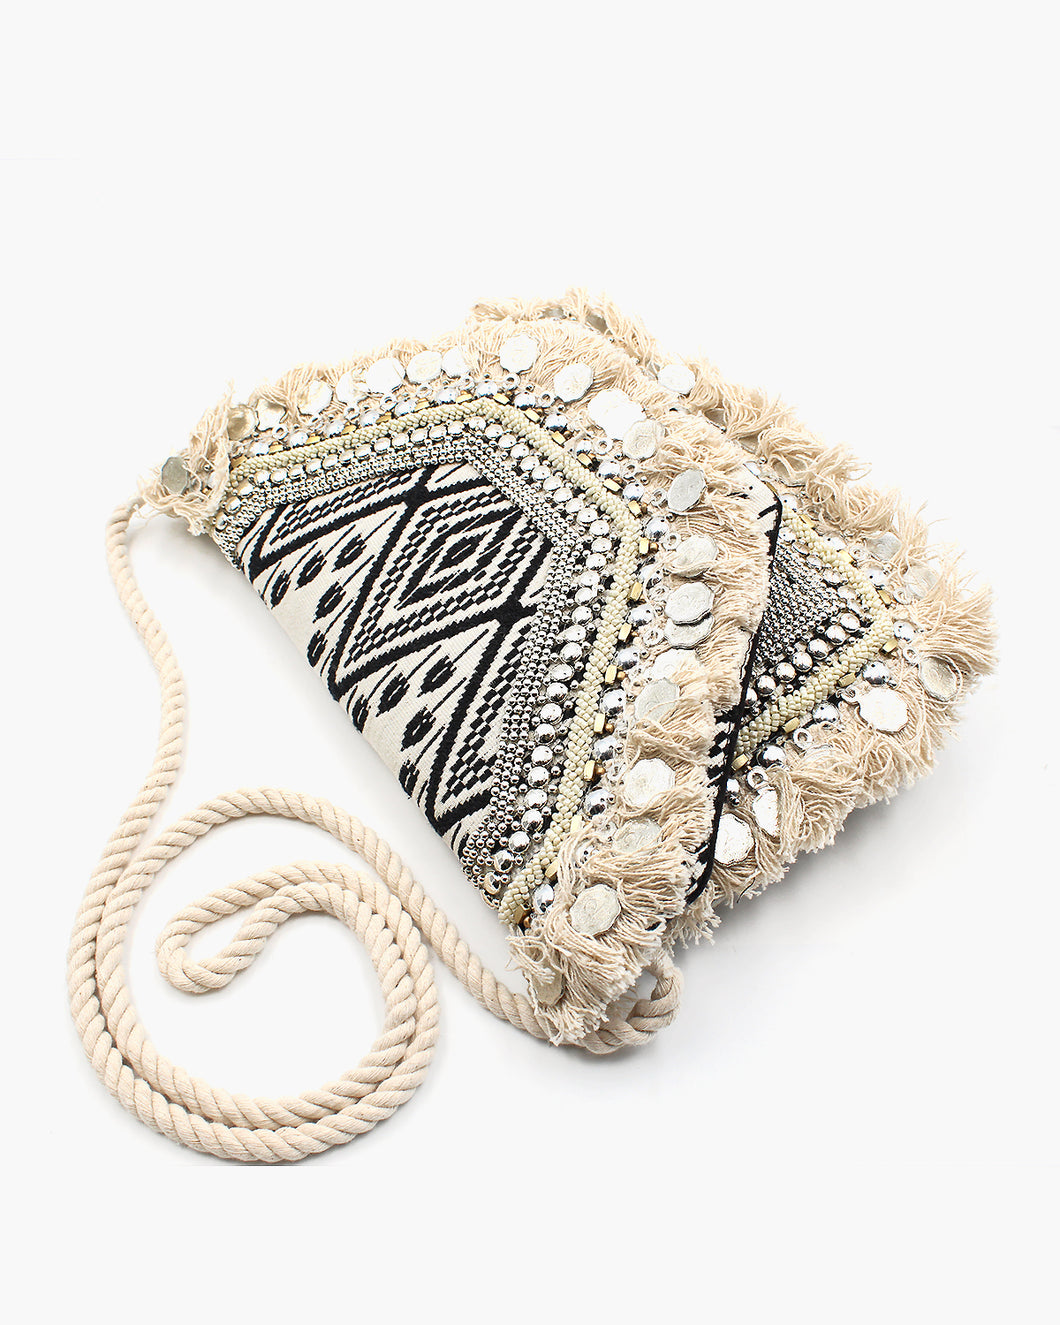 Bohemian Coin Clutch with Fringe